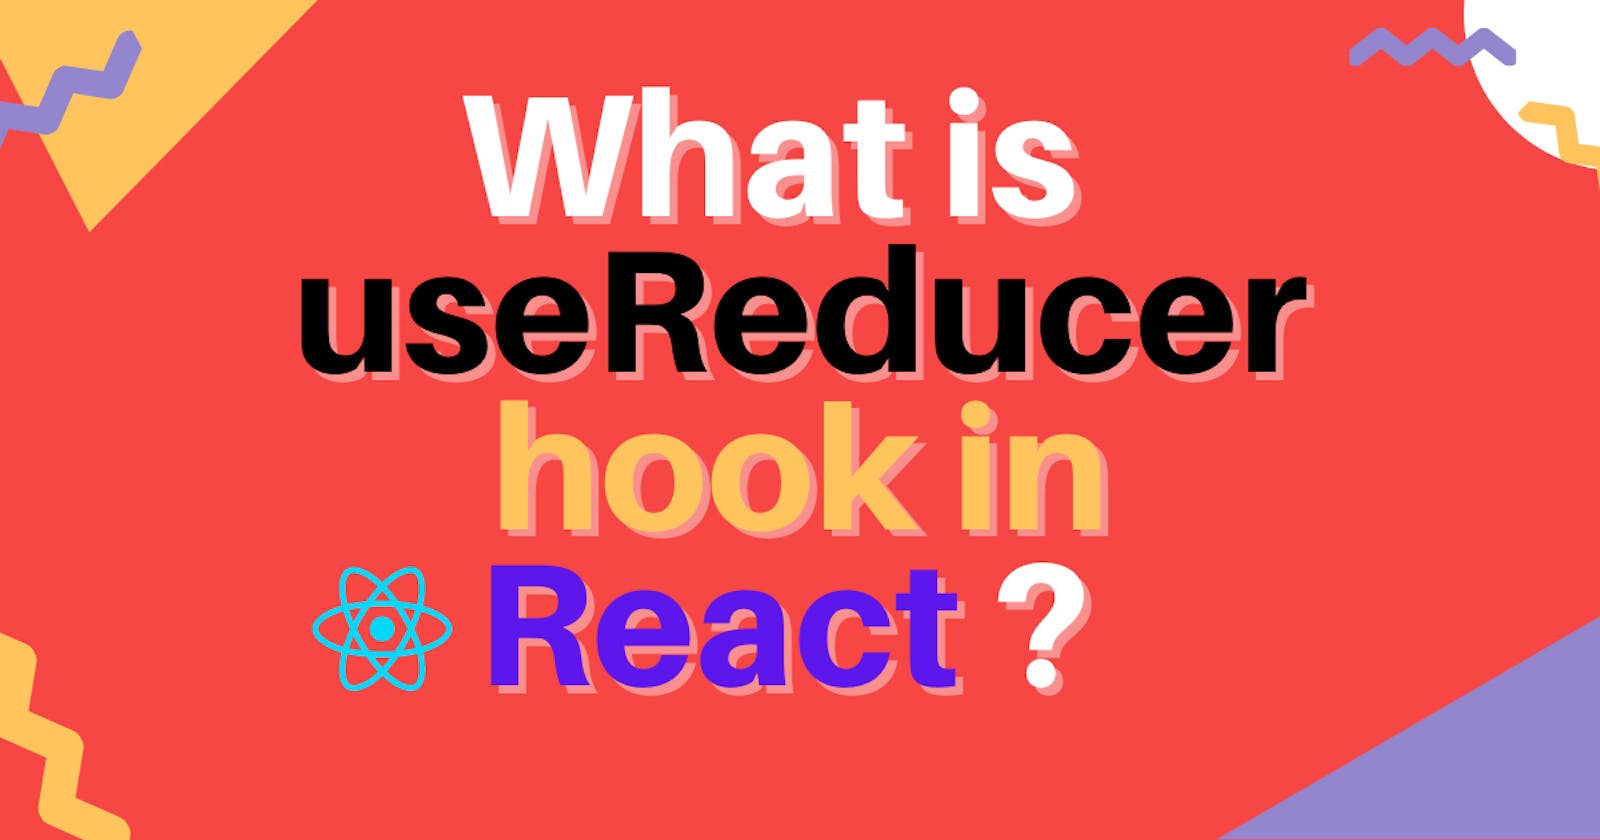 What is useReducer in React?